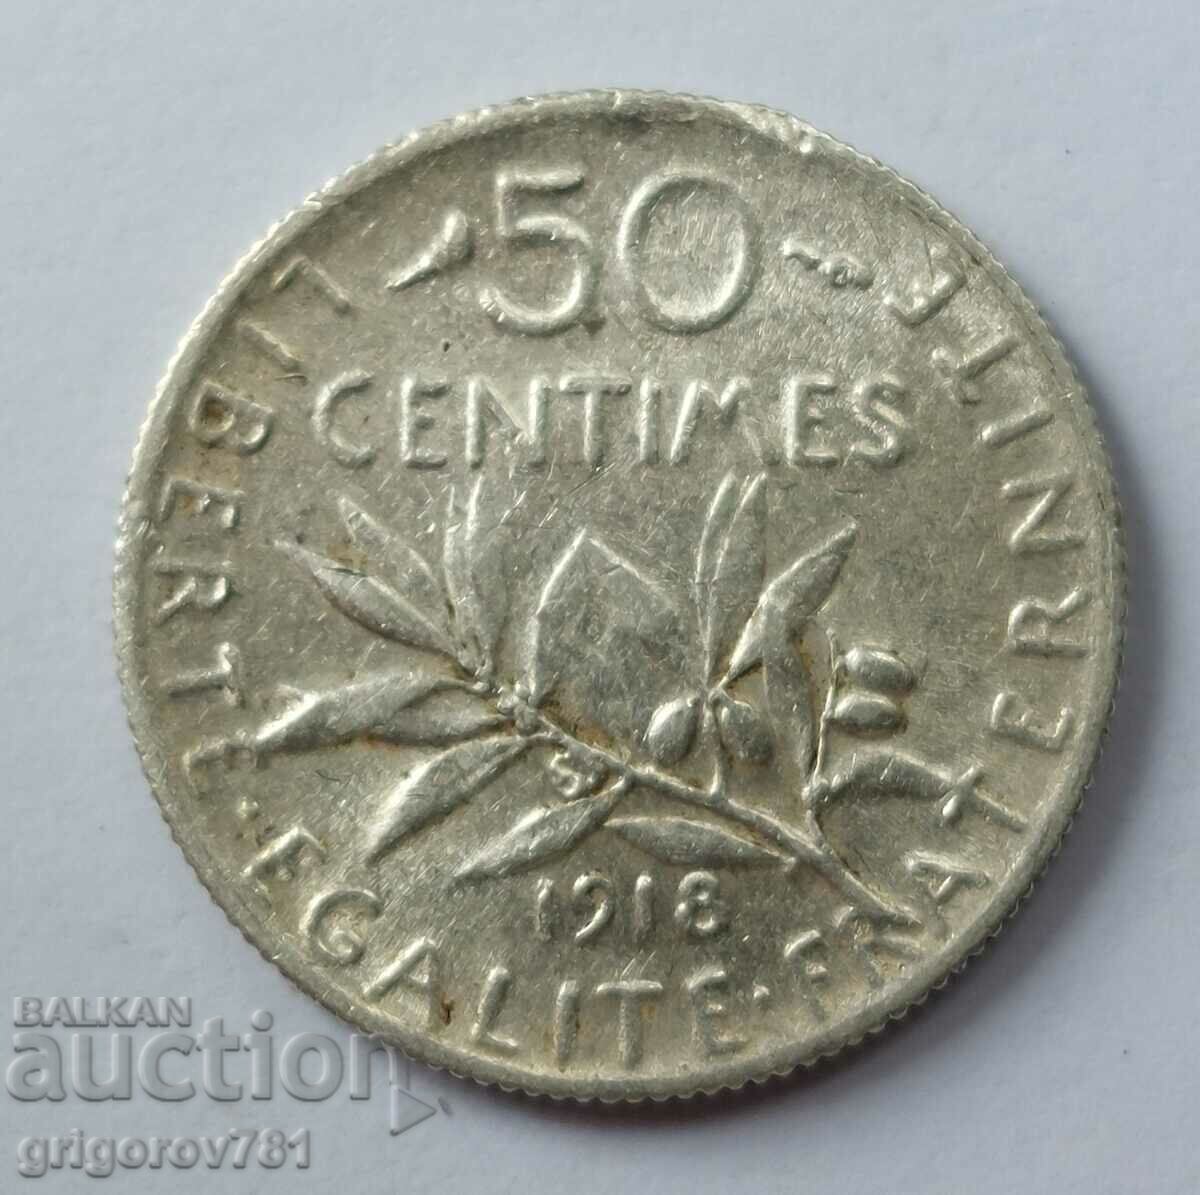 50 centimes silver France 1918 - silver coin №66